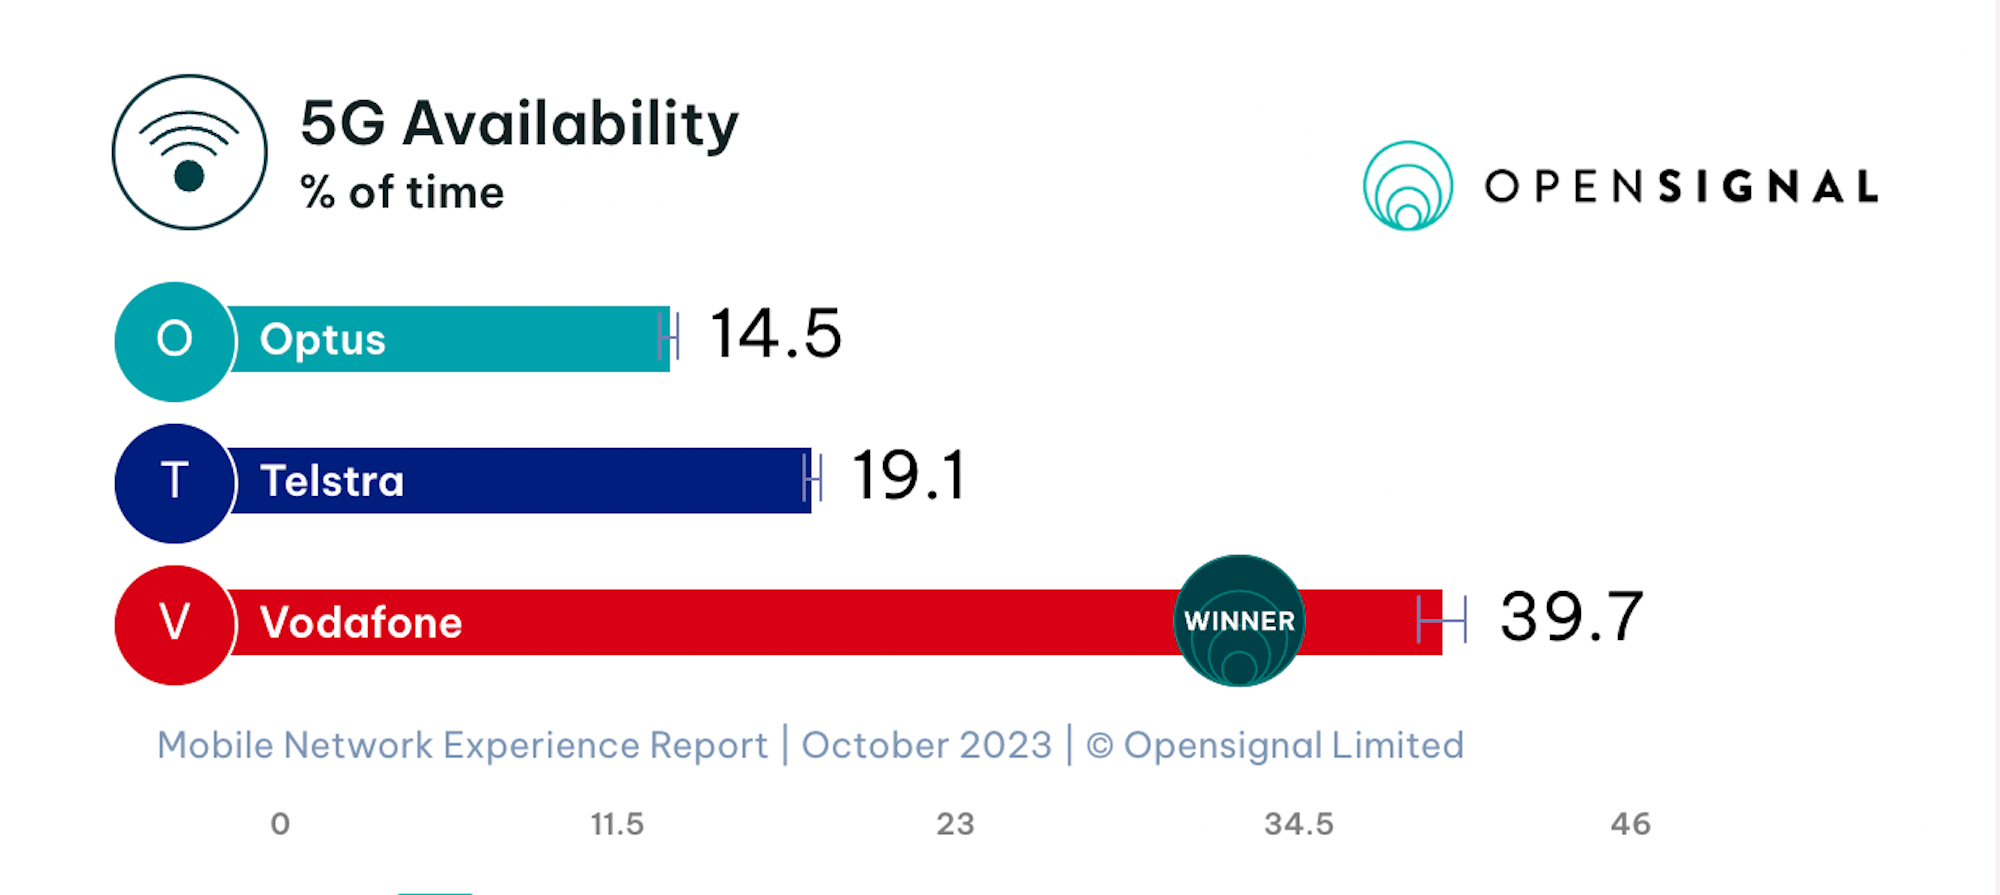 Chart of 5G availability across Telstra, Optus and Vodafone mobile networks